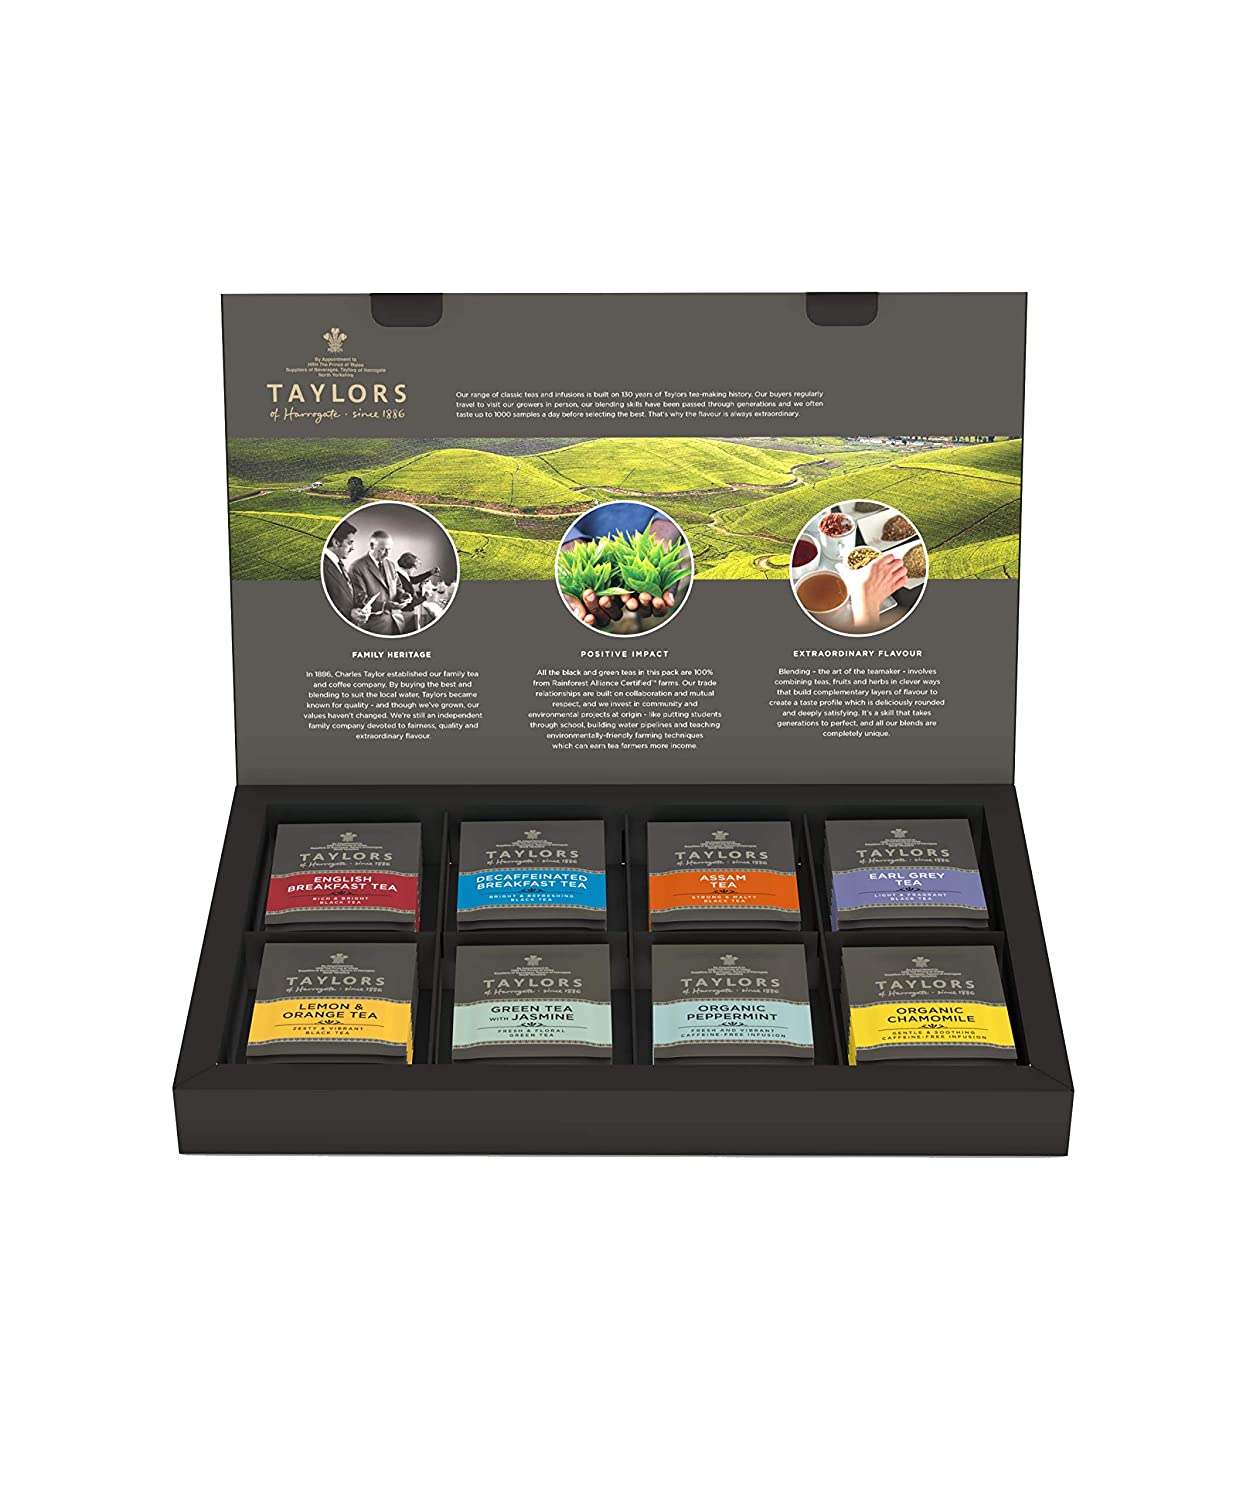 Review of Taylors of Harrogate Classic Tea Variety Box, 48 Count (Pack of 1)